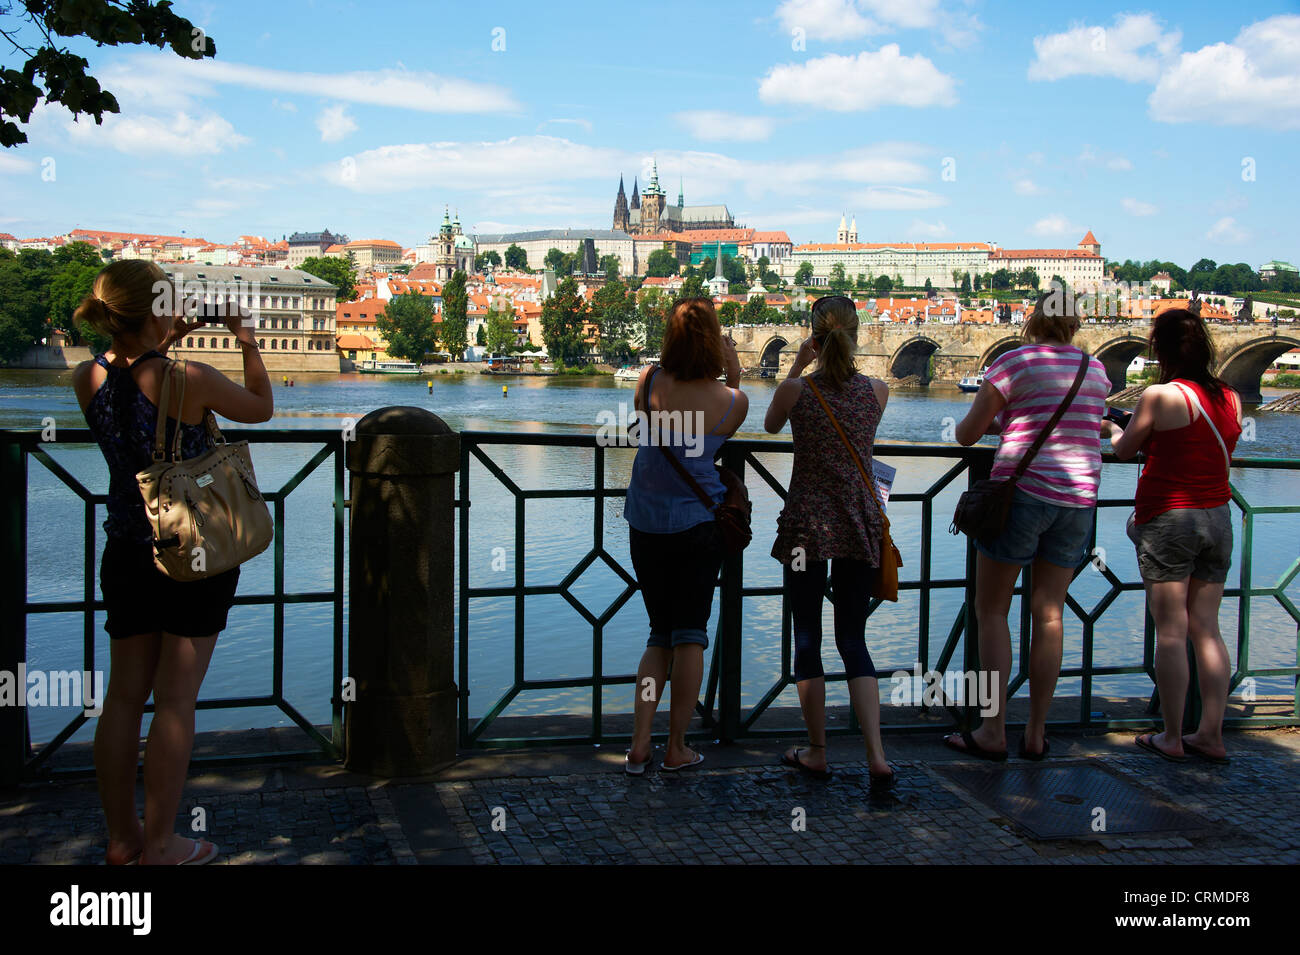 Tourists at Vltava river bank looking and photographing Saint Vitus's Cathedral Prague Castle Czech Republic Stock Photo